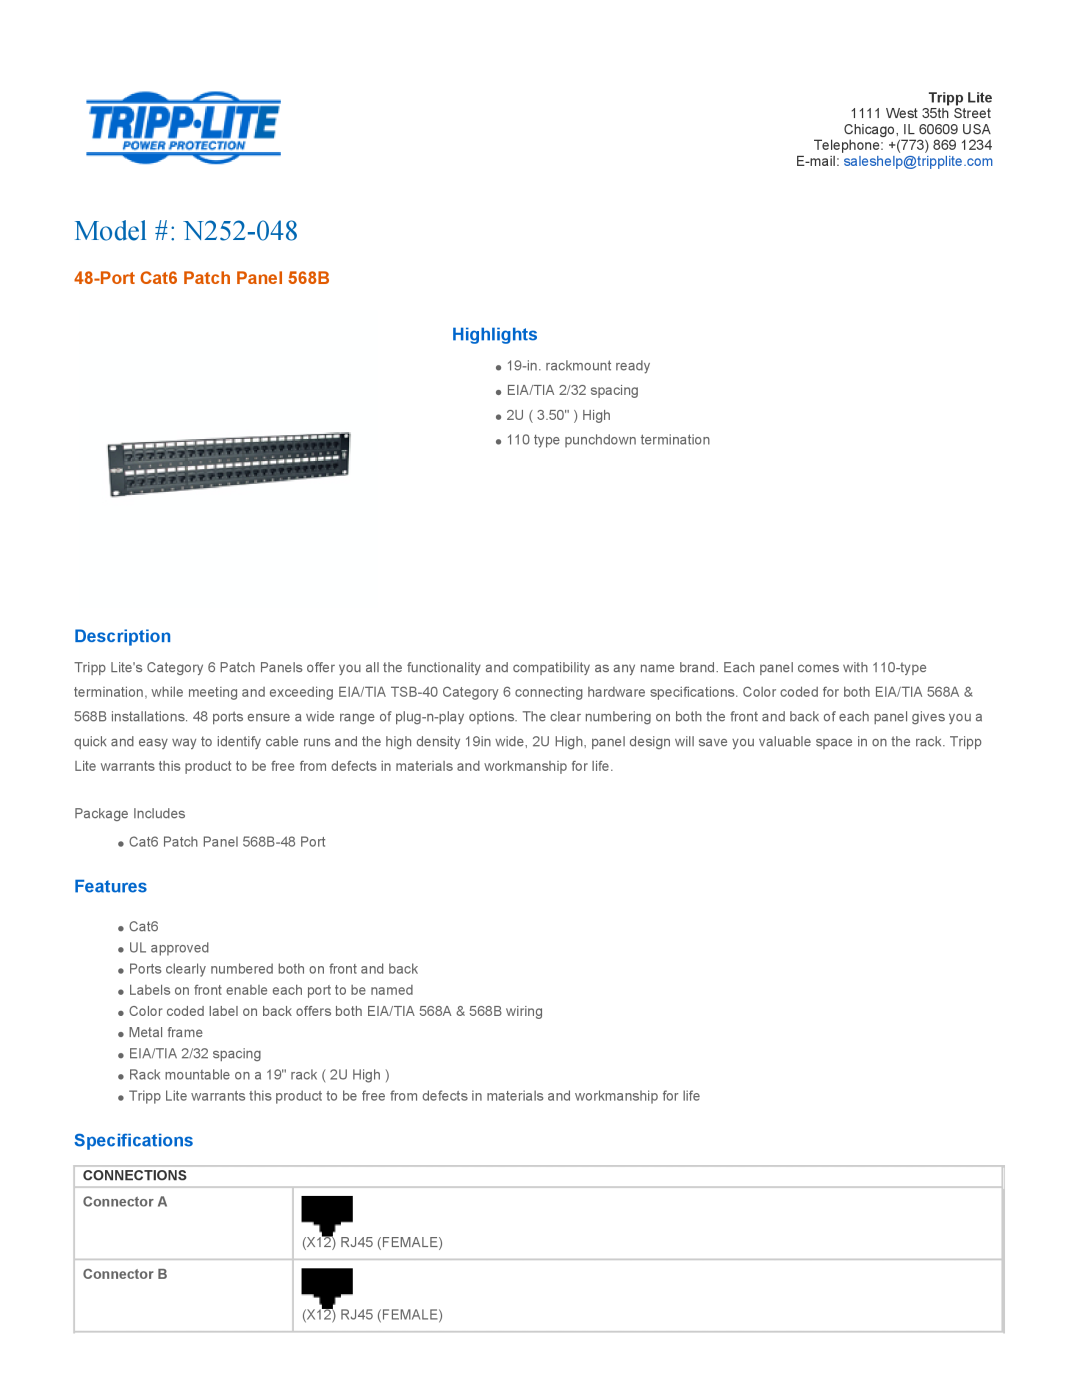 Tripp Lite N252-048 specifications Highlights, Description, Features, Specifications, Connections, Connector A 